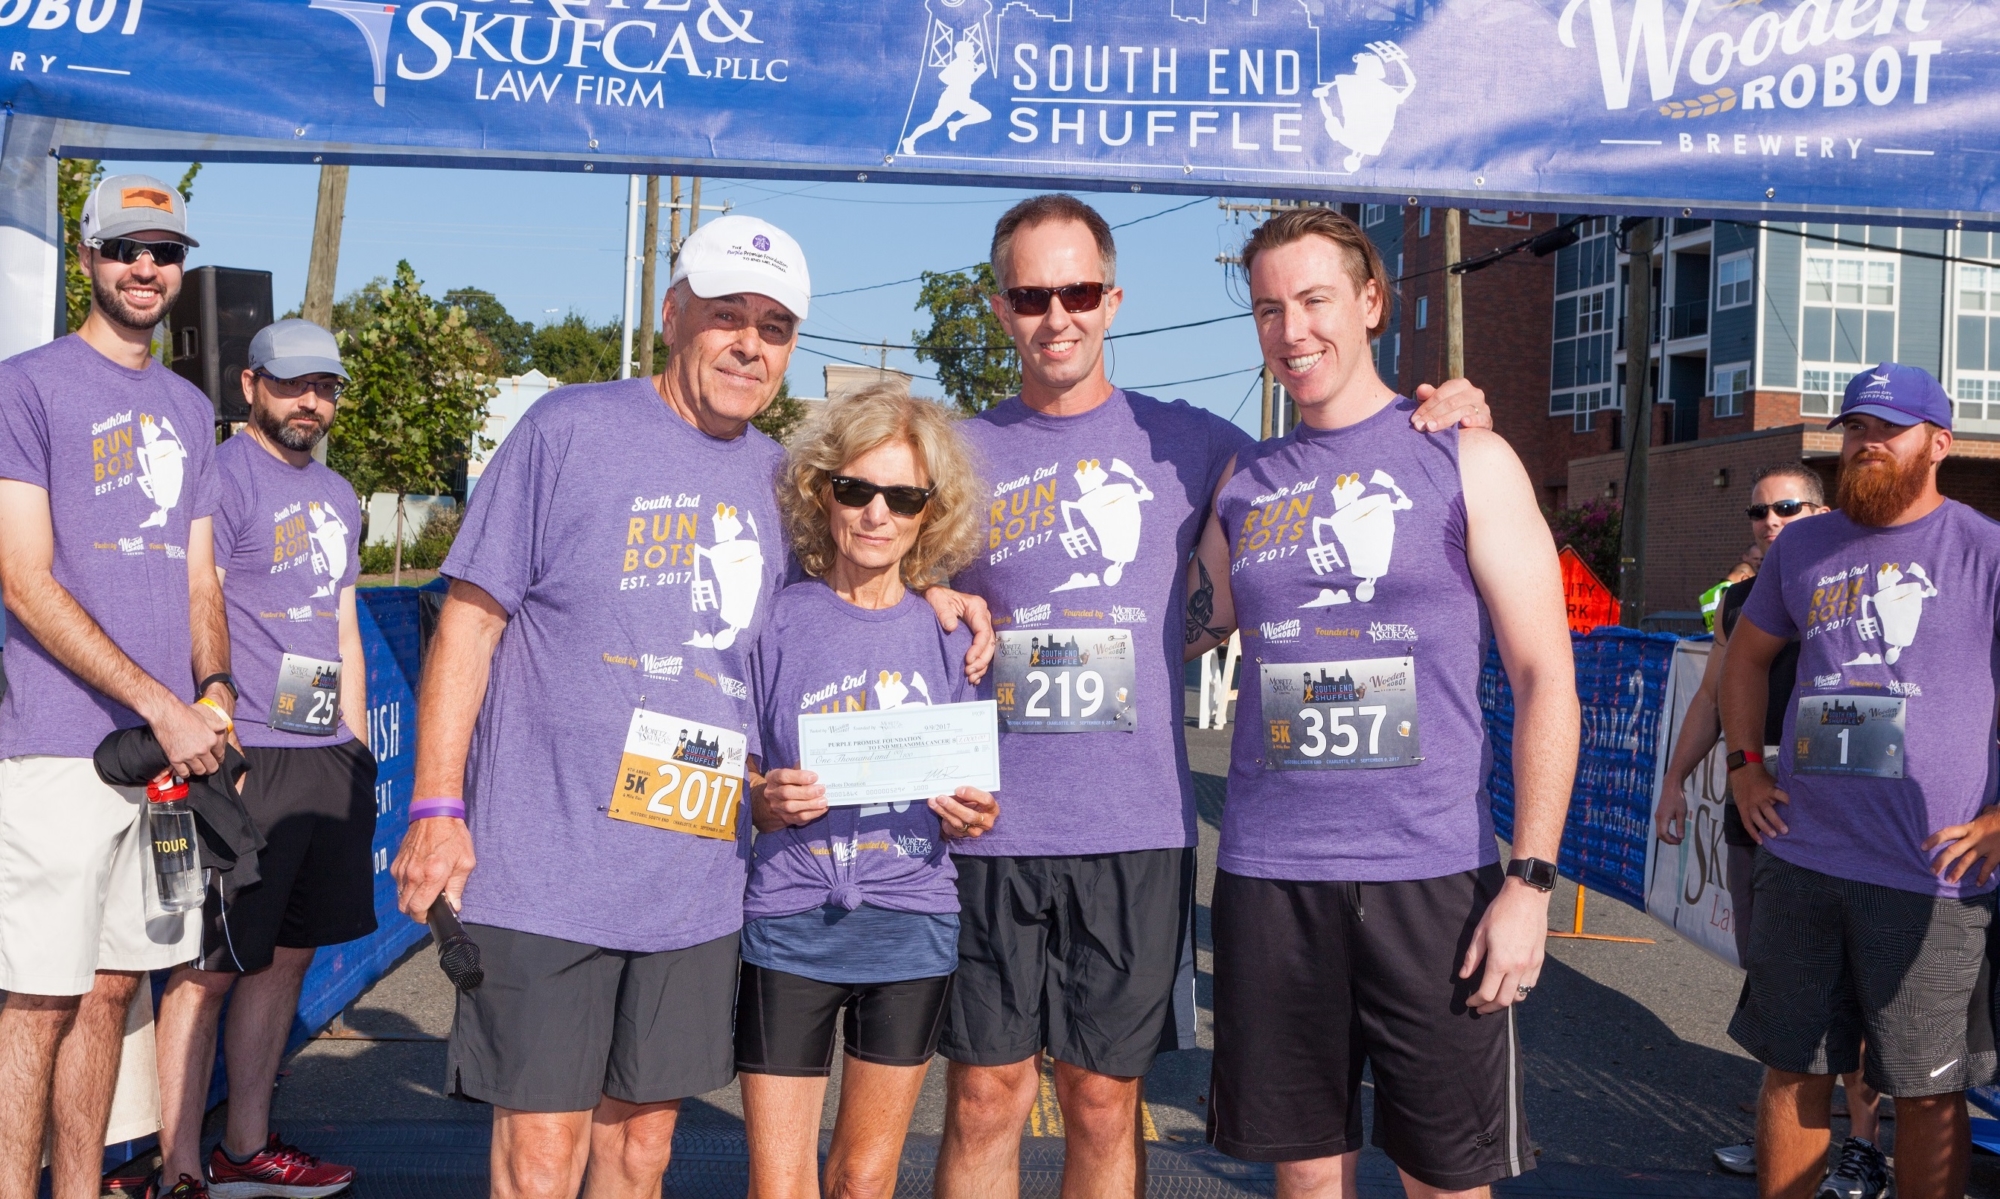 David & Donna Hodgkins and Ron Skufca at the Finish Line